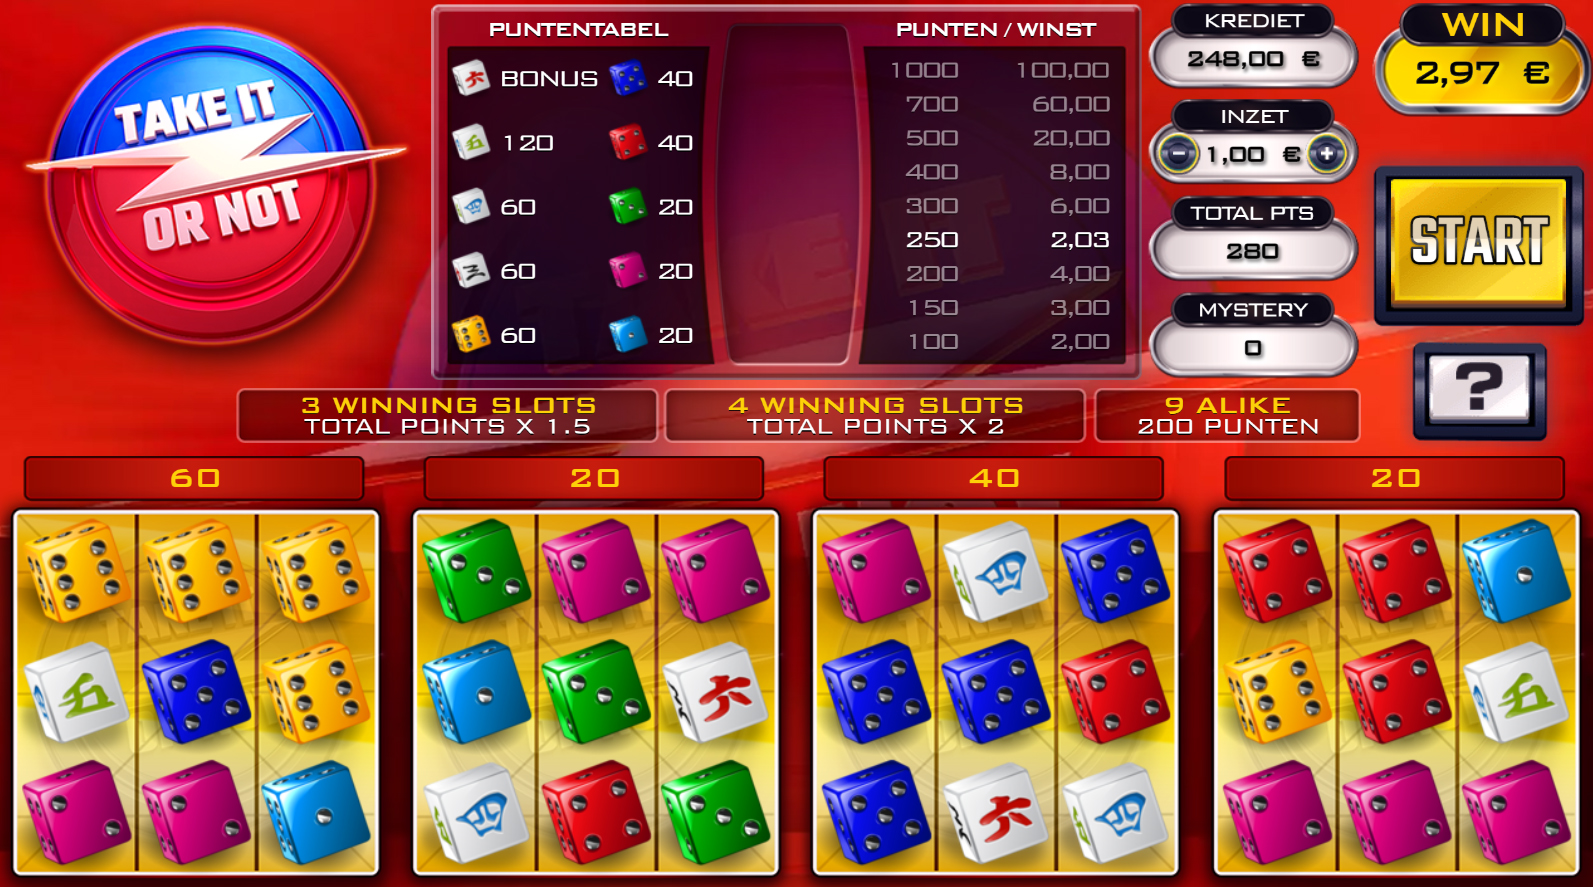 Take It Or Not - 4 slots - betFIRST Casino